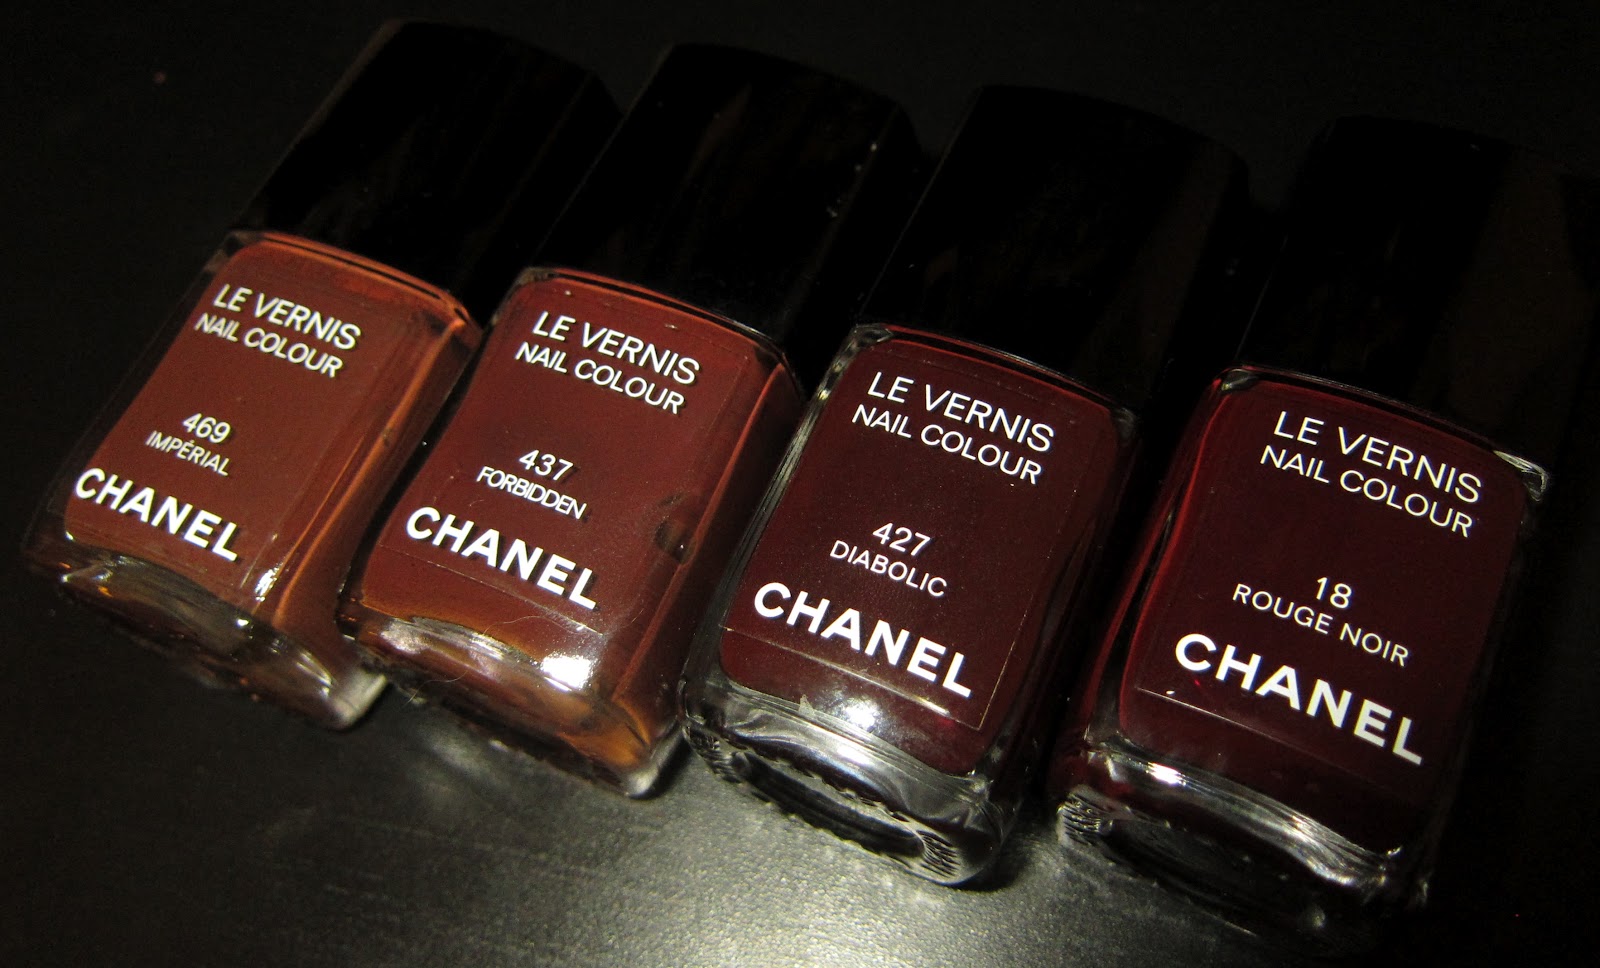 The new improved Chanel Rouge Noir - Opposable Thumbs